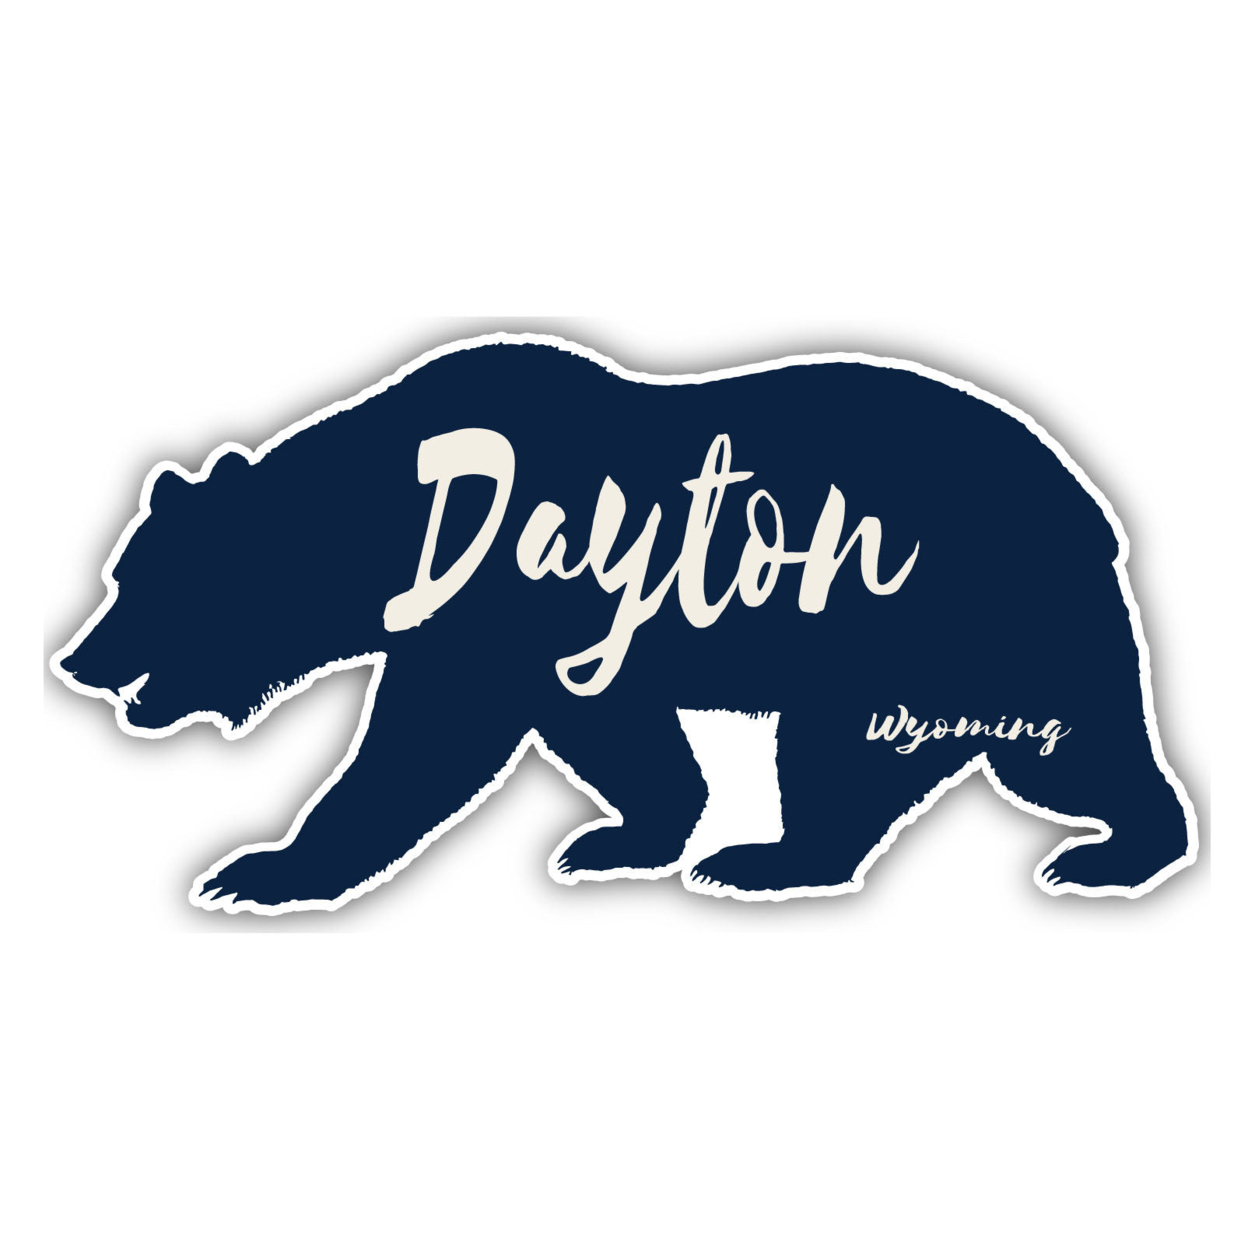 Dayton Wyoming Souvenir Decorative Stickers (Choose Theme And Size) - 4-Pack, 10-Inch, Bear